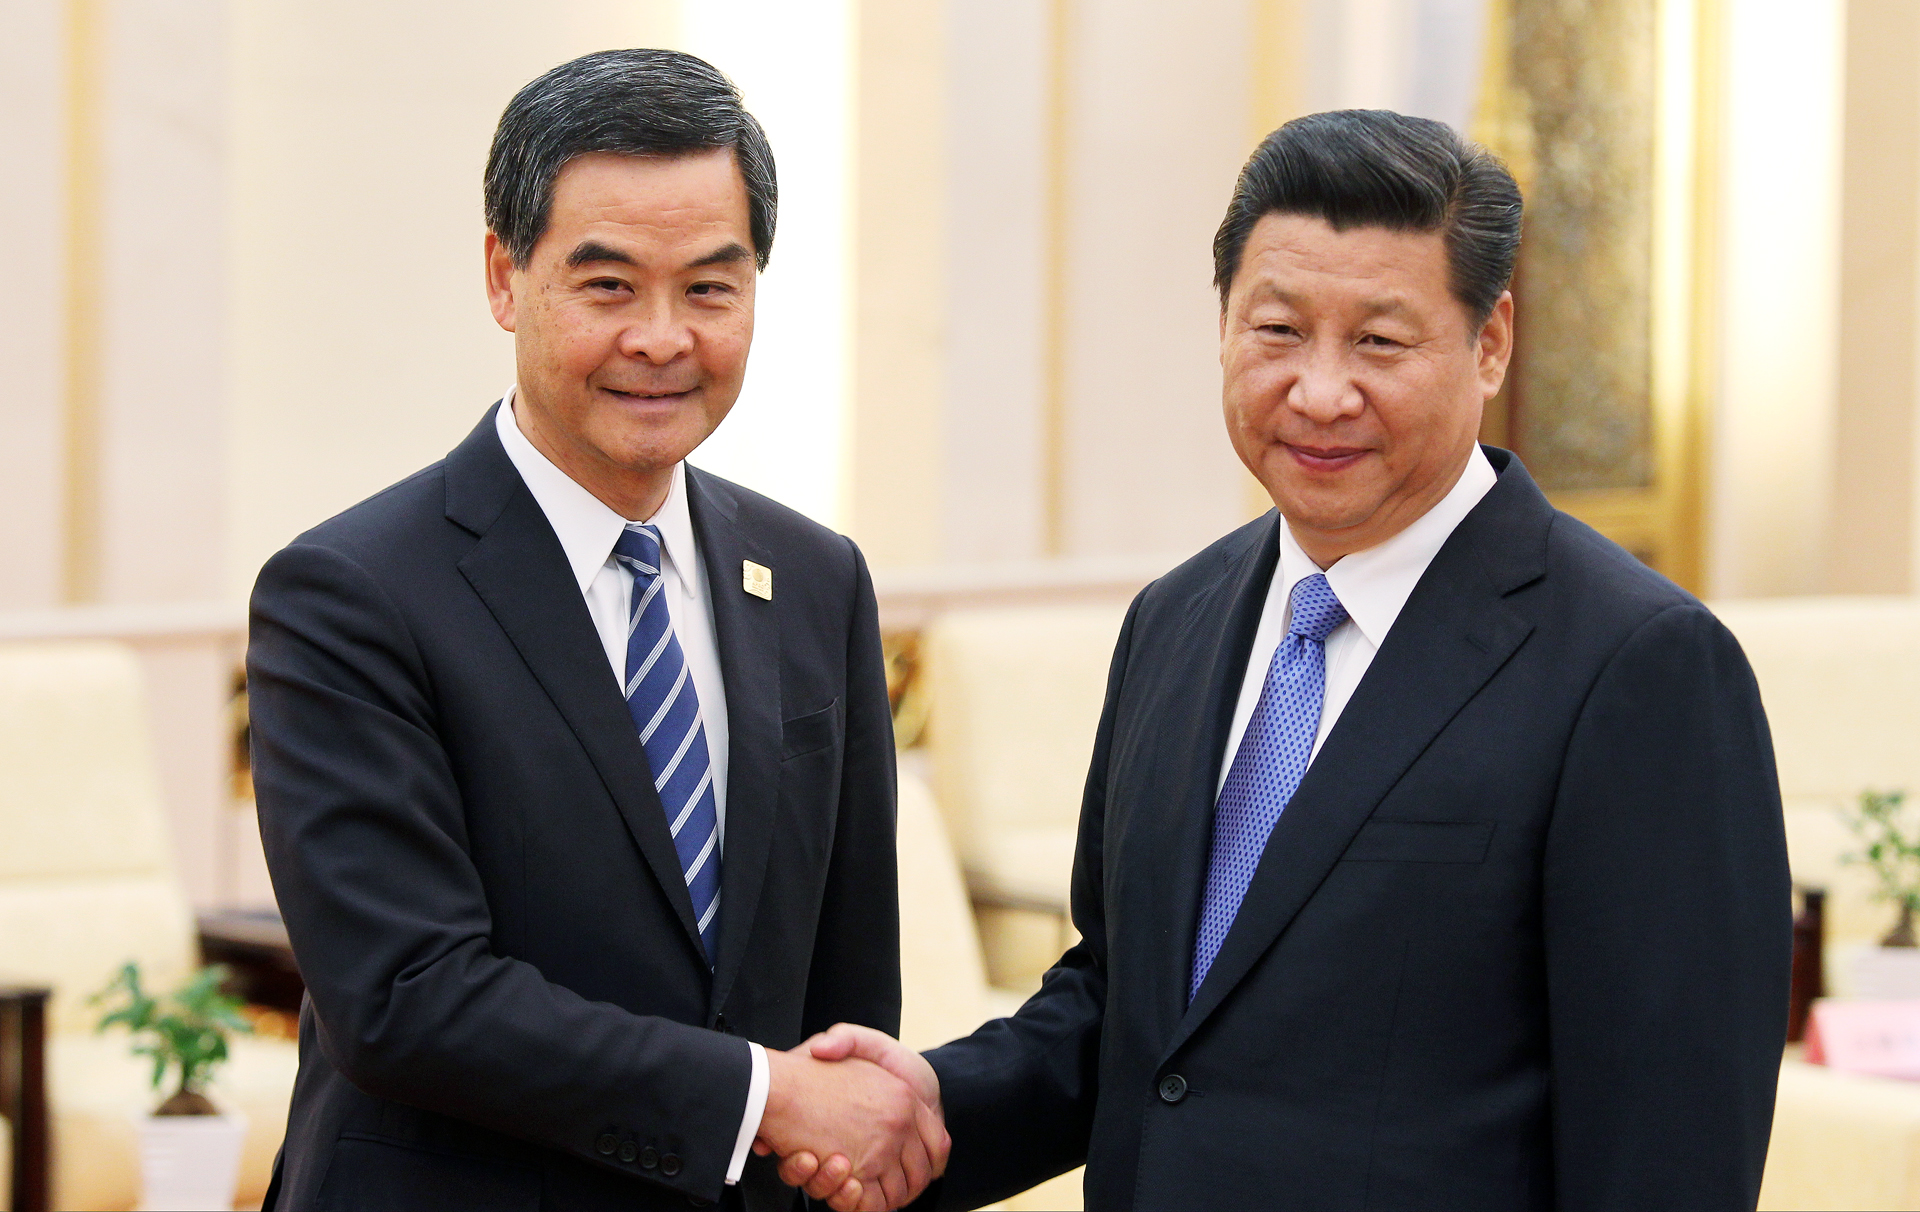 Chinese president Xi Jinping (right) meets Hong Kong Chief Executive Leung Chun-ying in the Great Hall of the People in Beijing in 2014. Photo: Simon Song